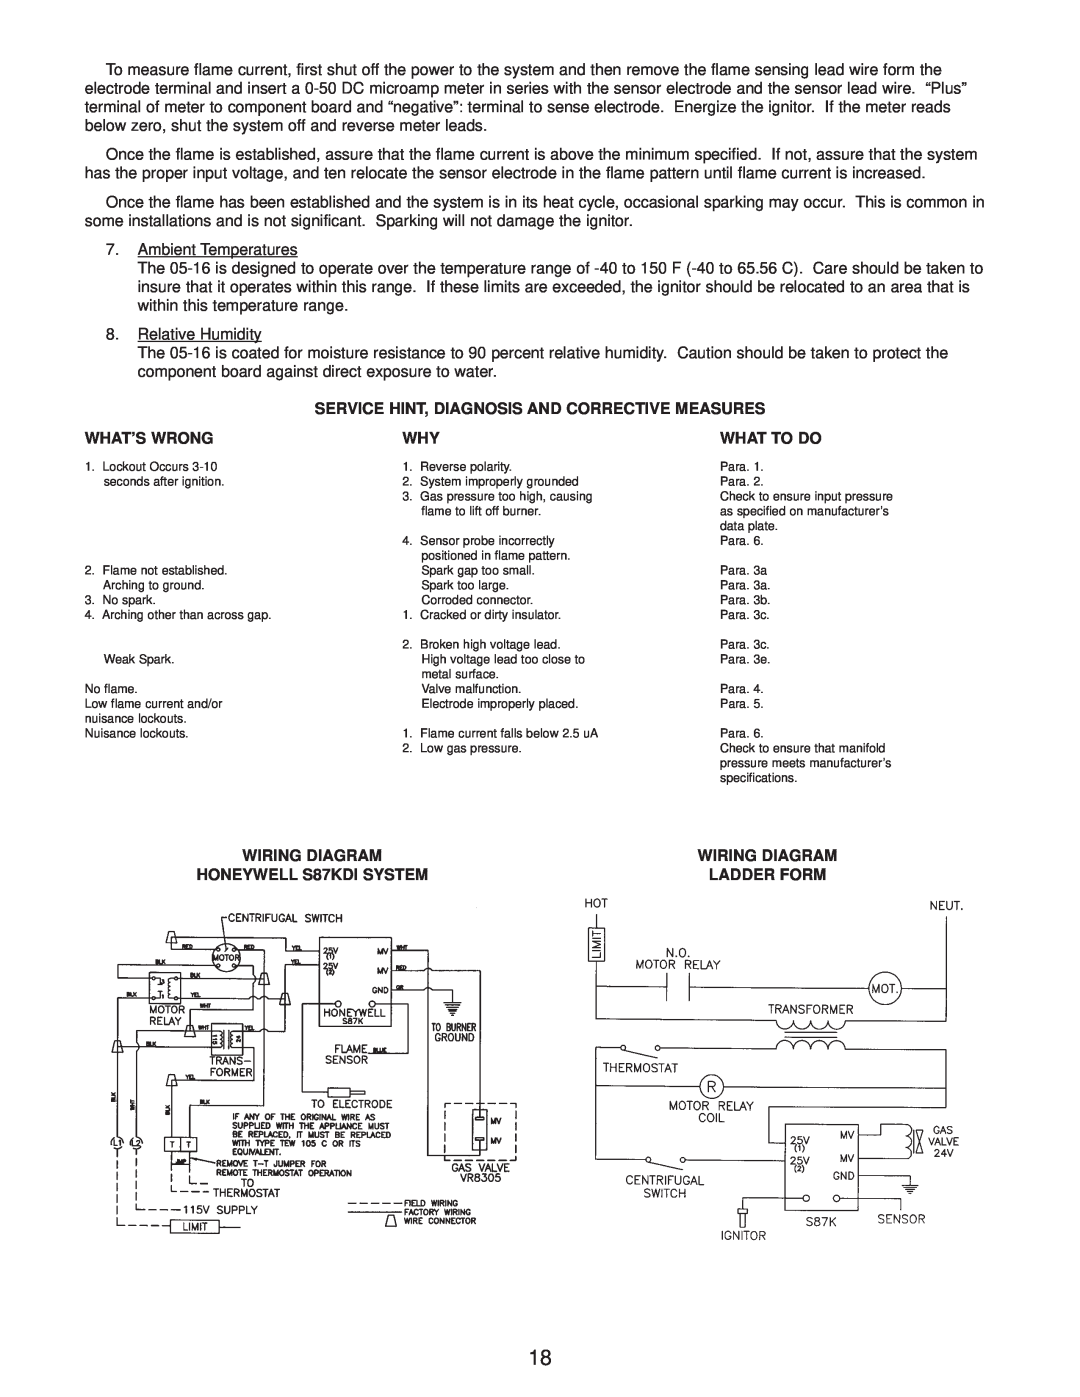 Wayne P250AF-DI Service Hint, Diagnosis And Corrective Measures, What’S Wrong, What To Do, Wiring Diagram, Ladder Form 